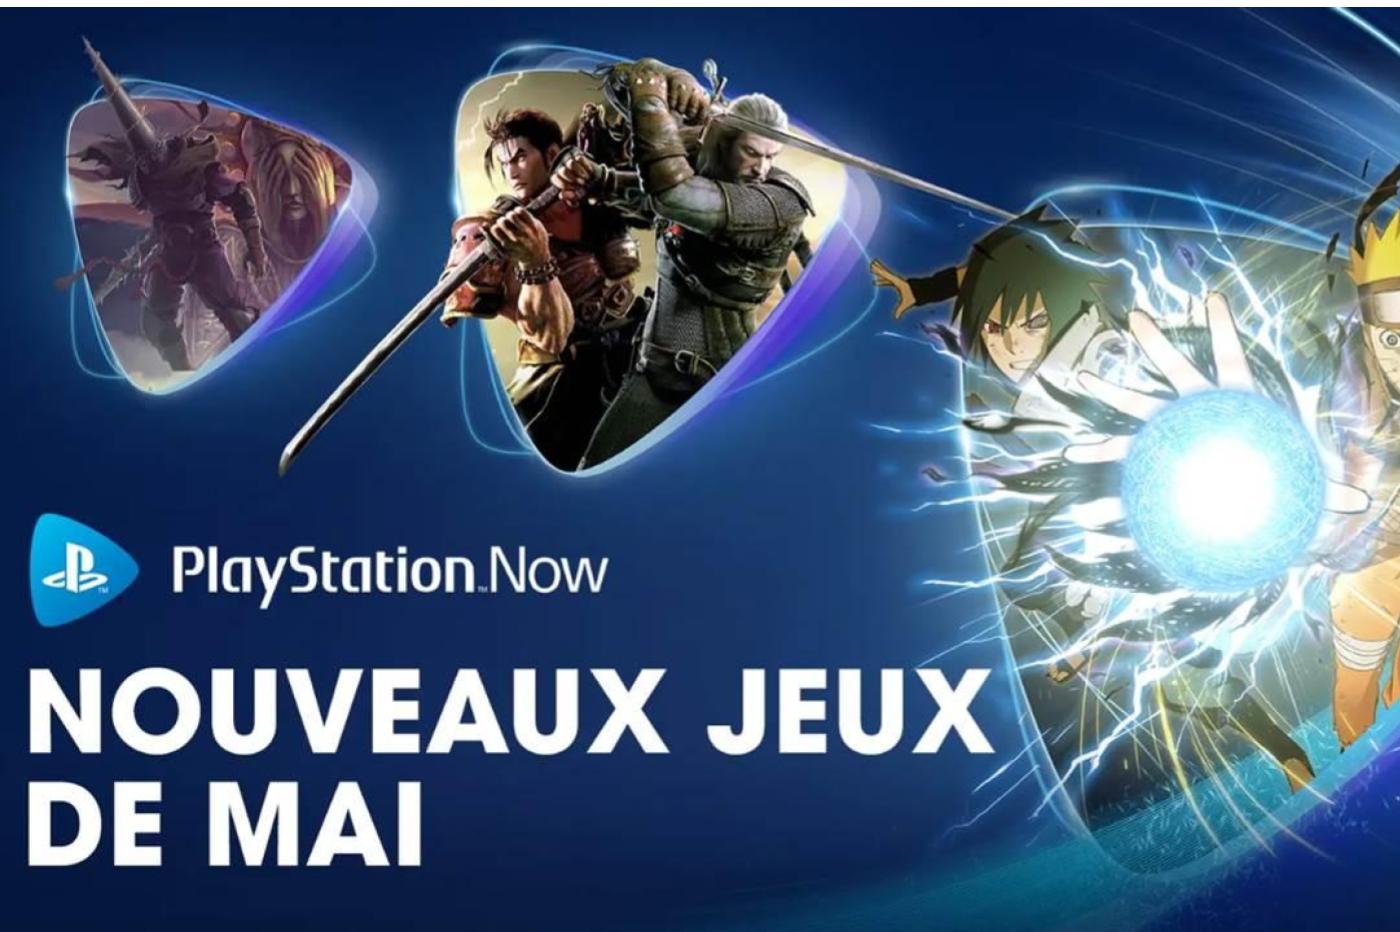 May 2022 PS Now poster featuring Naruto, Soulcalibur VI and Blasphemous